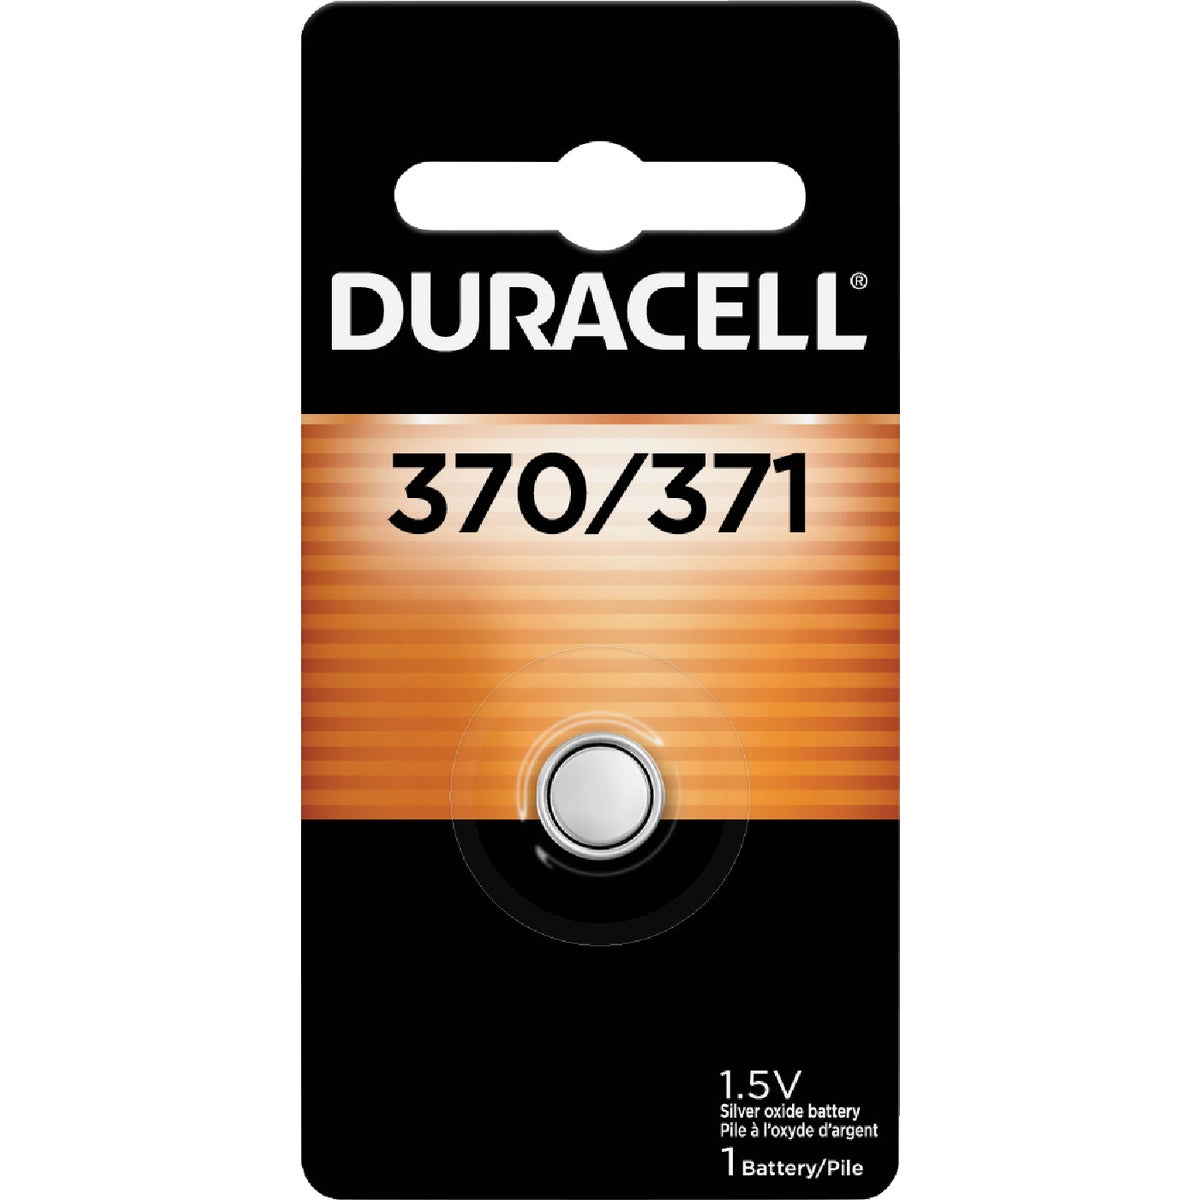 Duracell 370/371 Silver Oxide Button Cell Battery